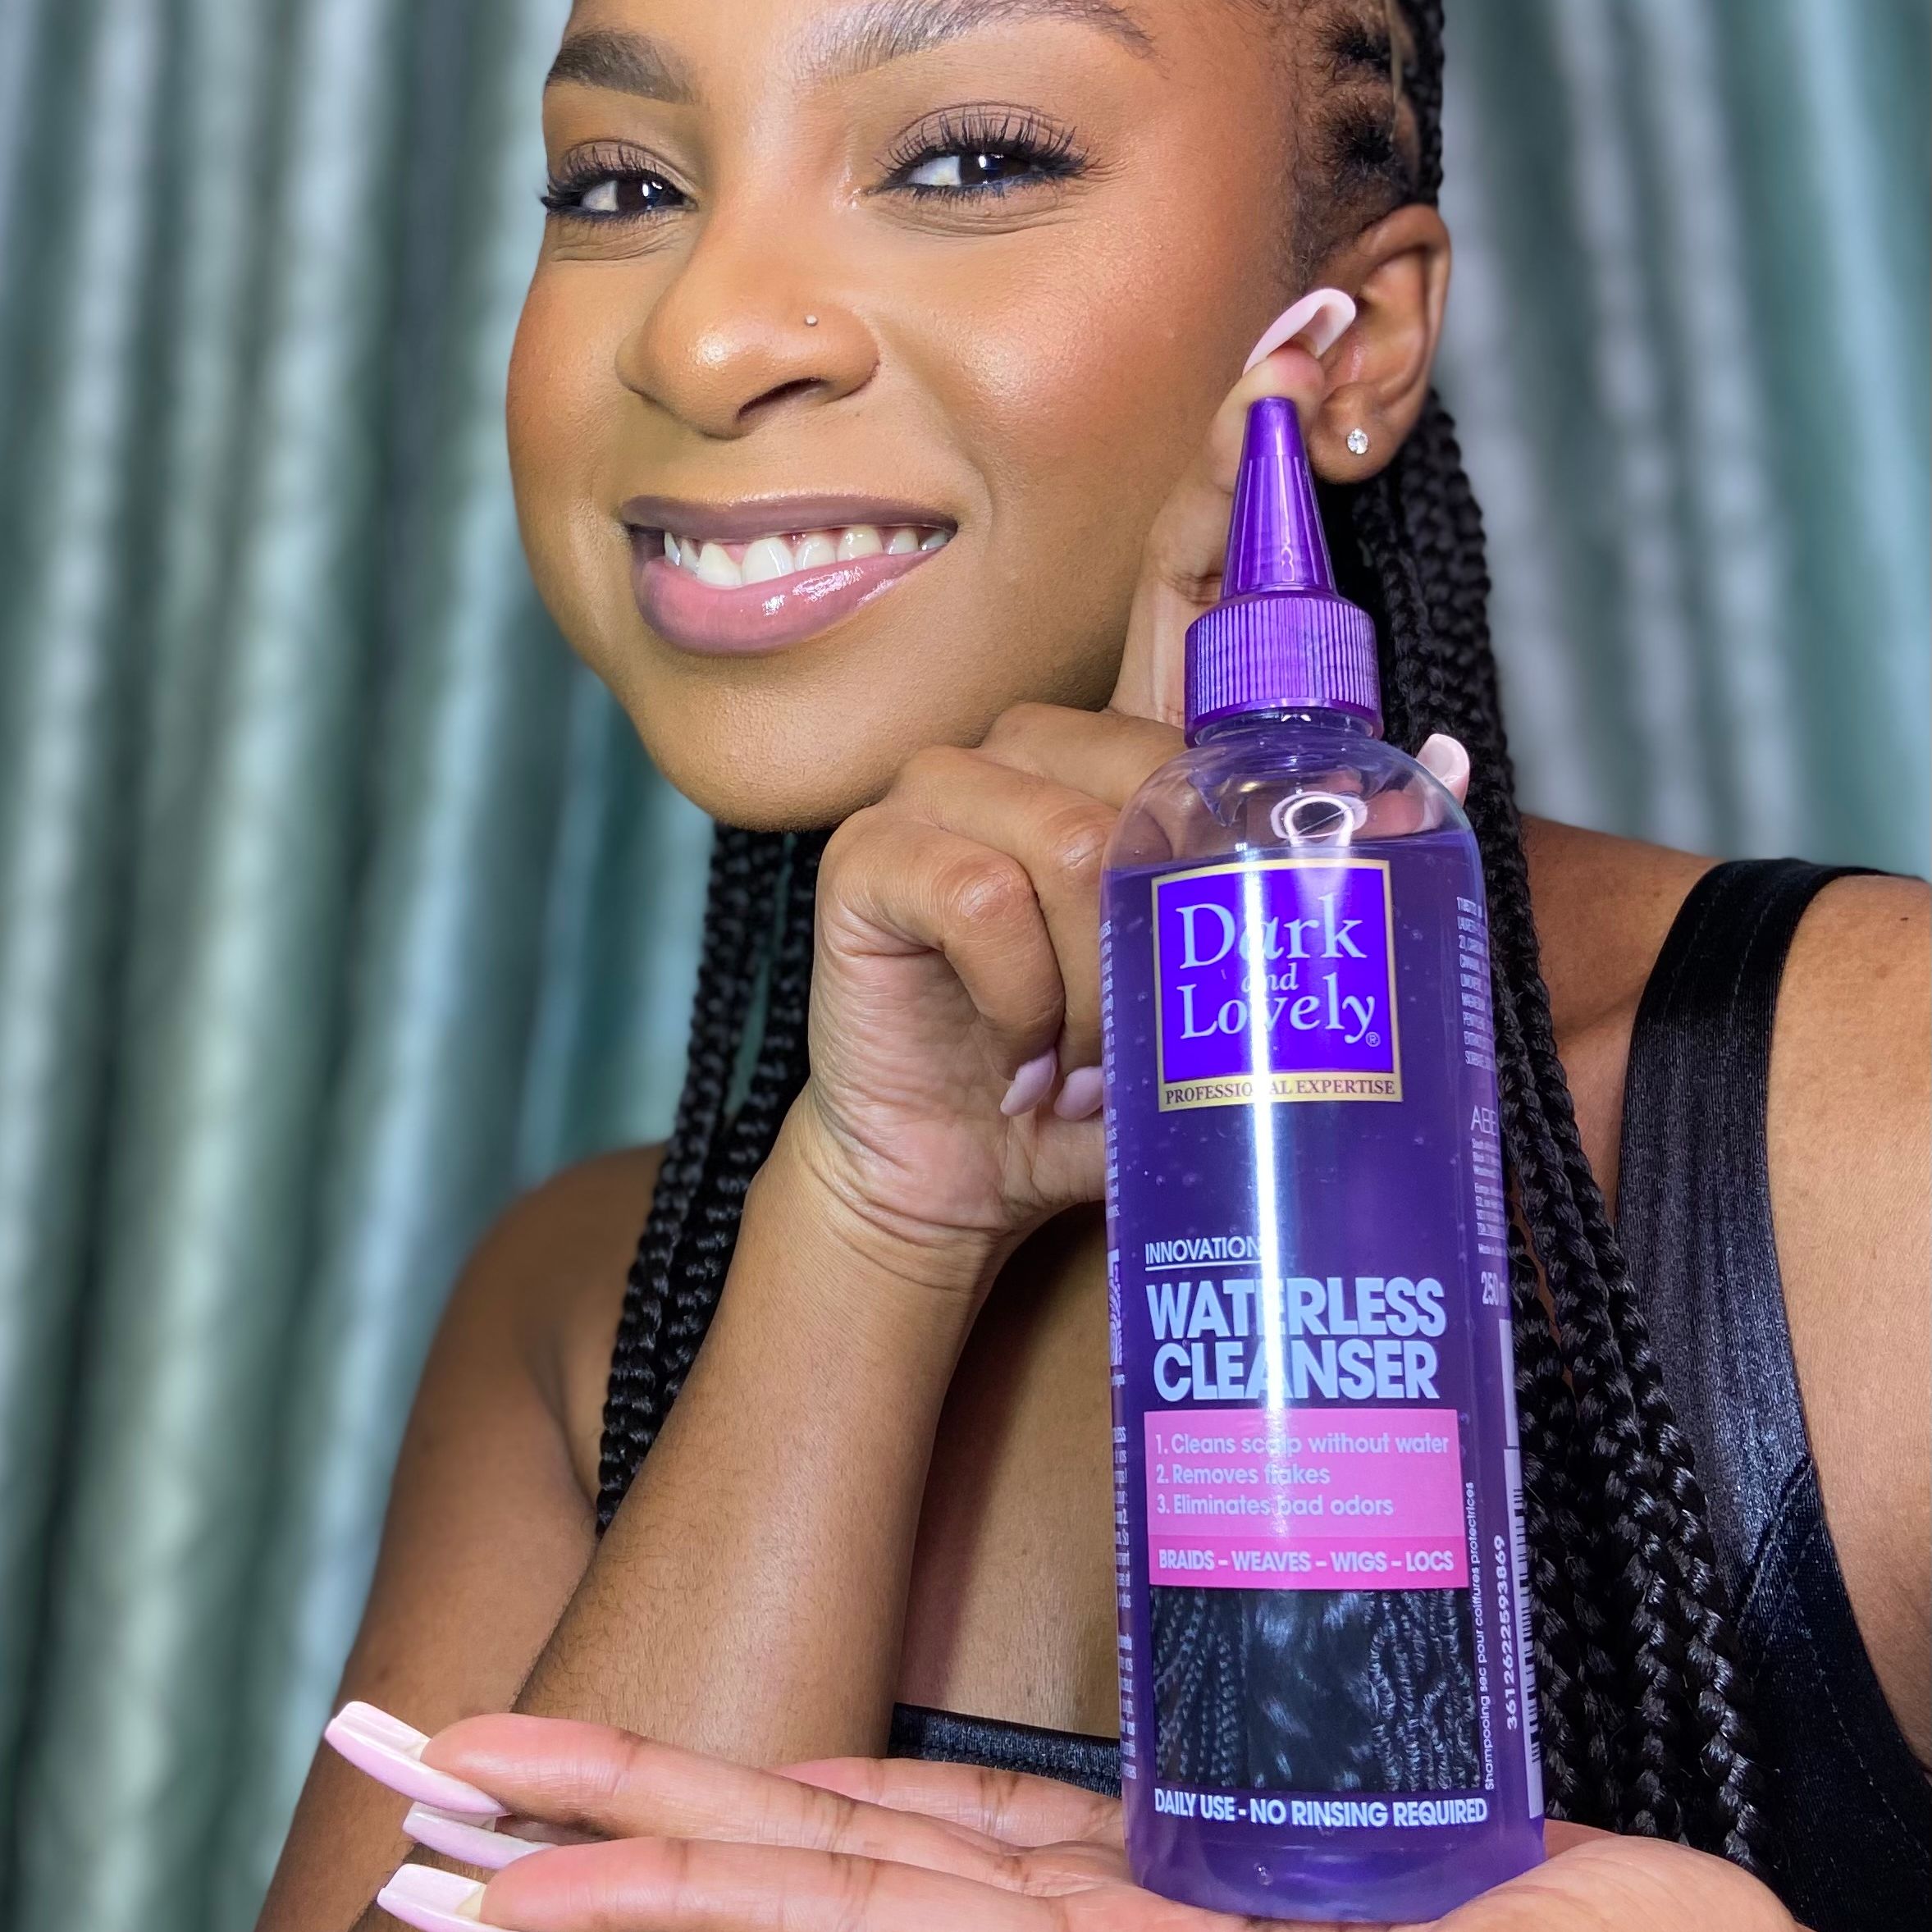 Dark and Lovely Waterless Cleanser Campaign